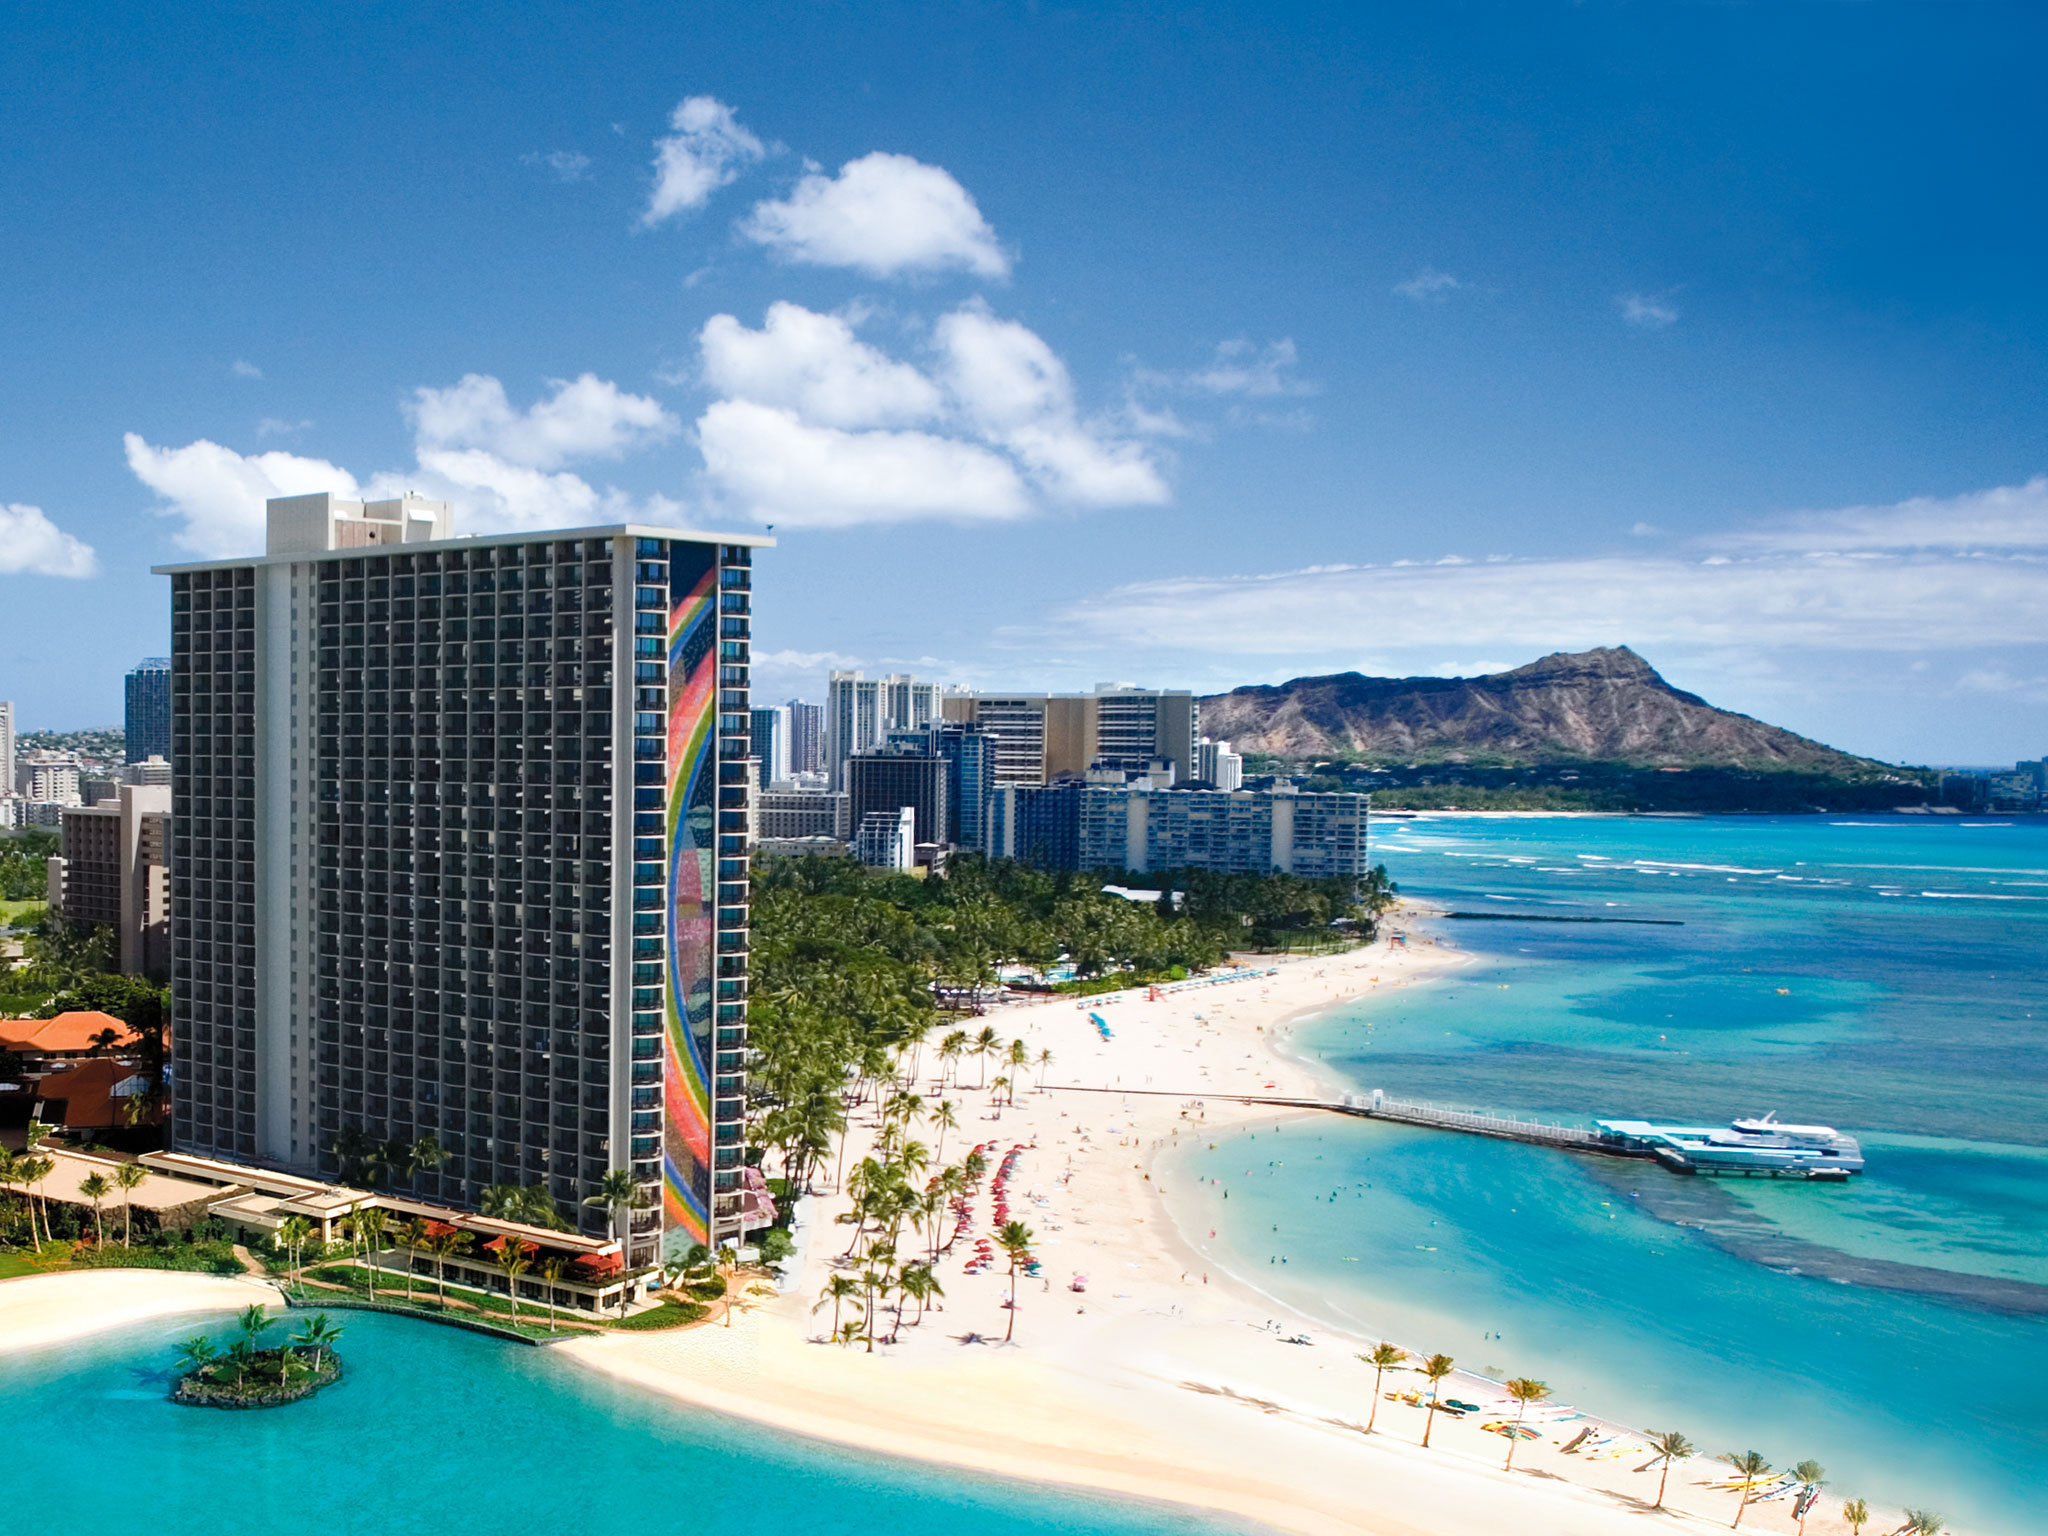 Waikiki Beach Hotel Pictures Are Recently Added To Beaches Wallpaper